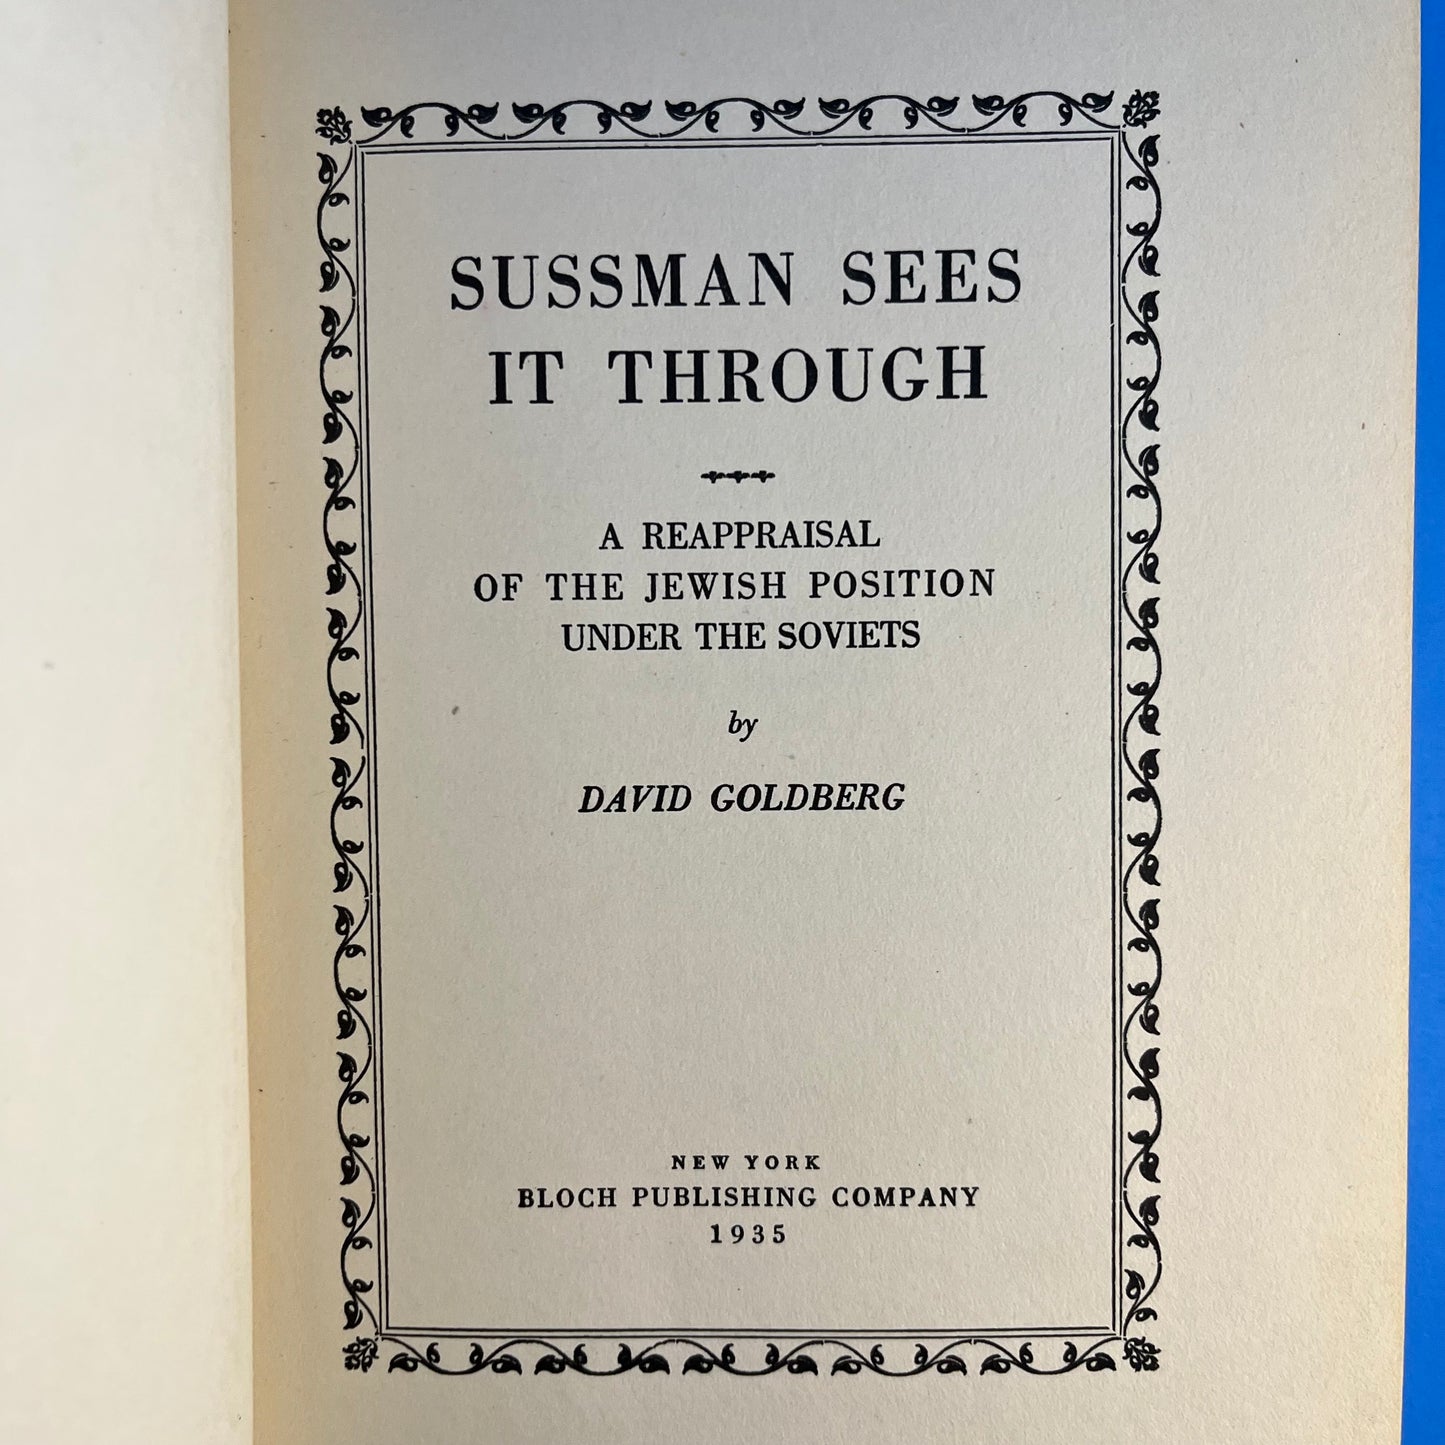 Sussman Sees it Through: A Reappraisal of the Jewish Position under the Soviets